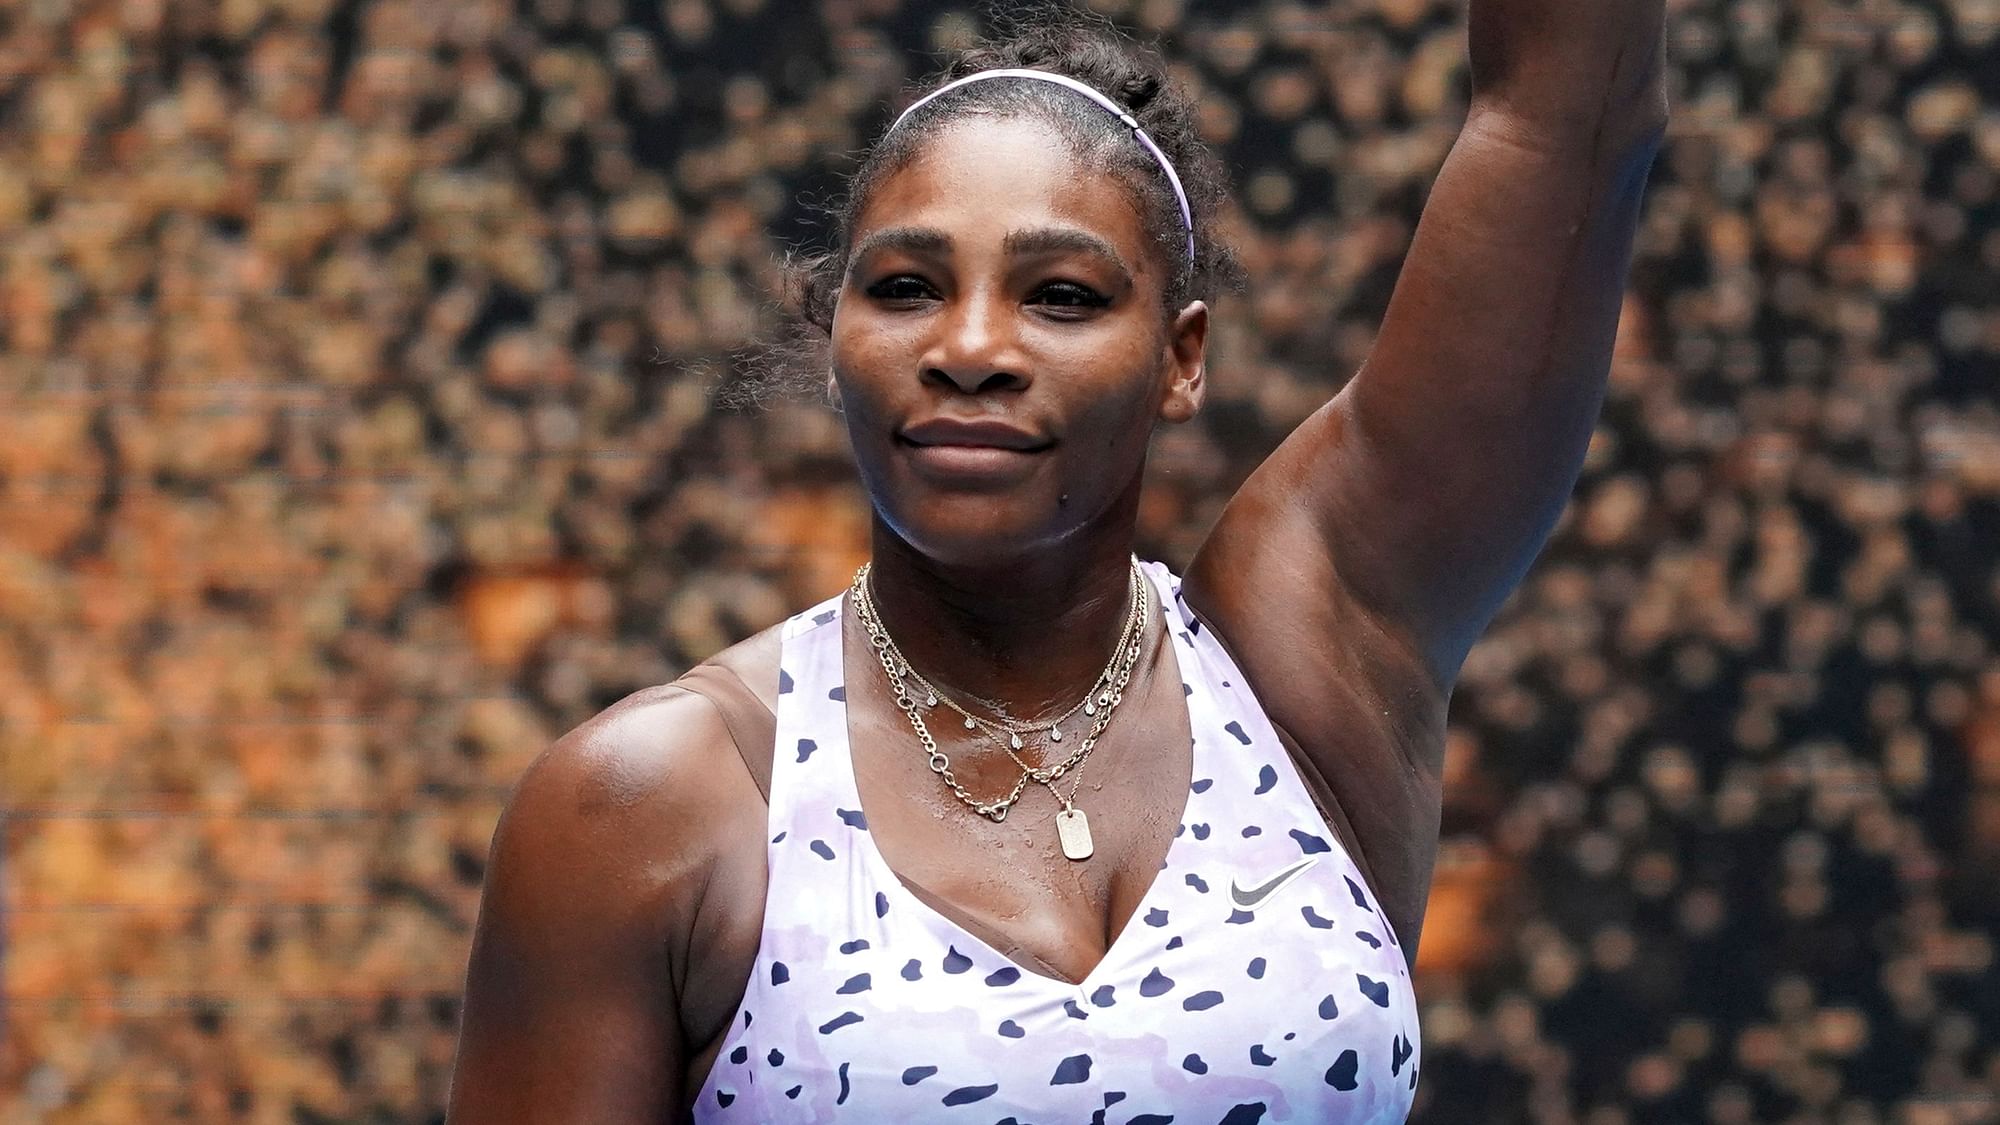 Seeded No.8, Williams hardly broke any sweat as she ousted Potapova 6-0, 6-3 in a match that lasted less than an hour.